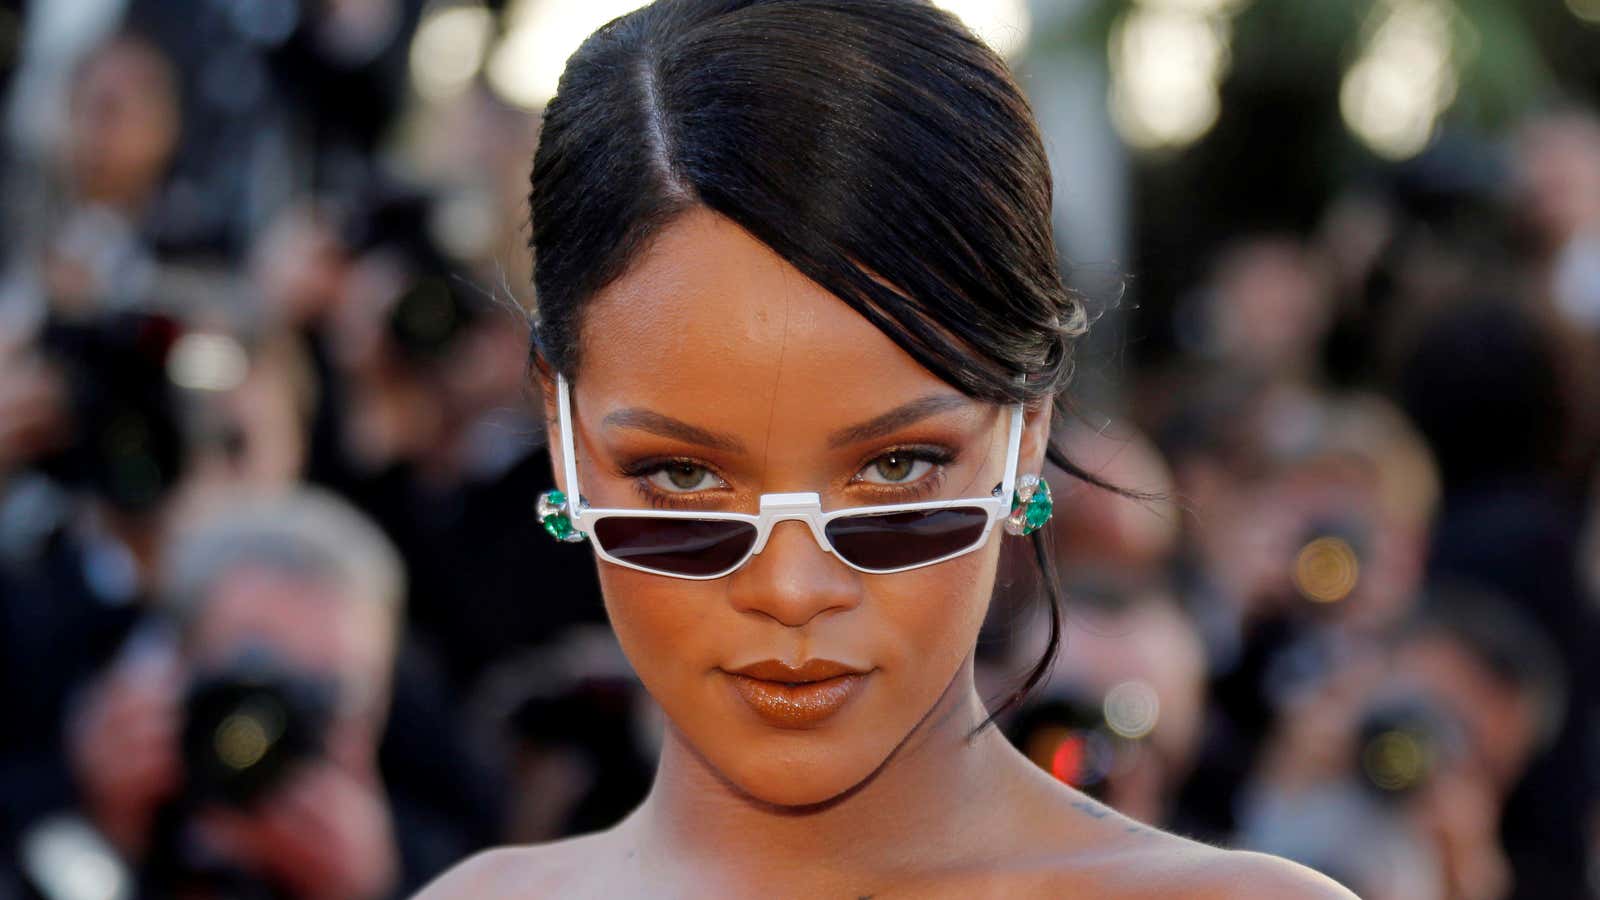 The Fenty Effect is sending waves through the beauty industry.